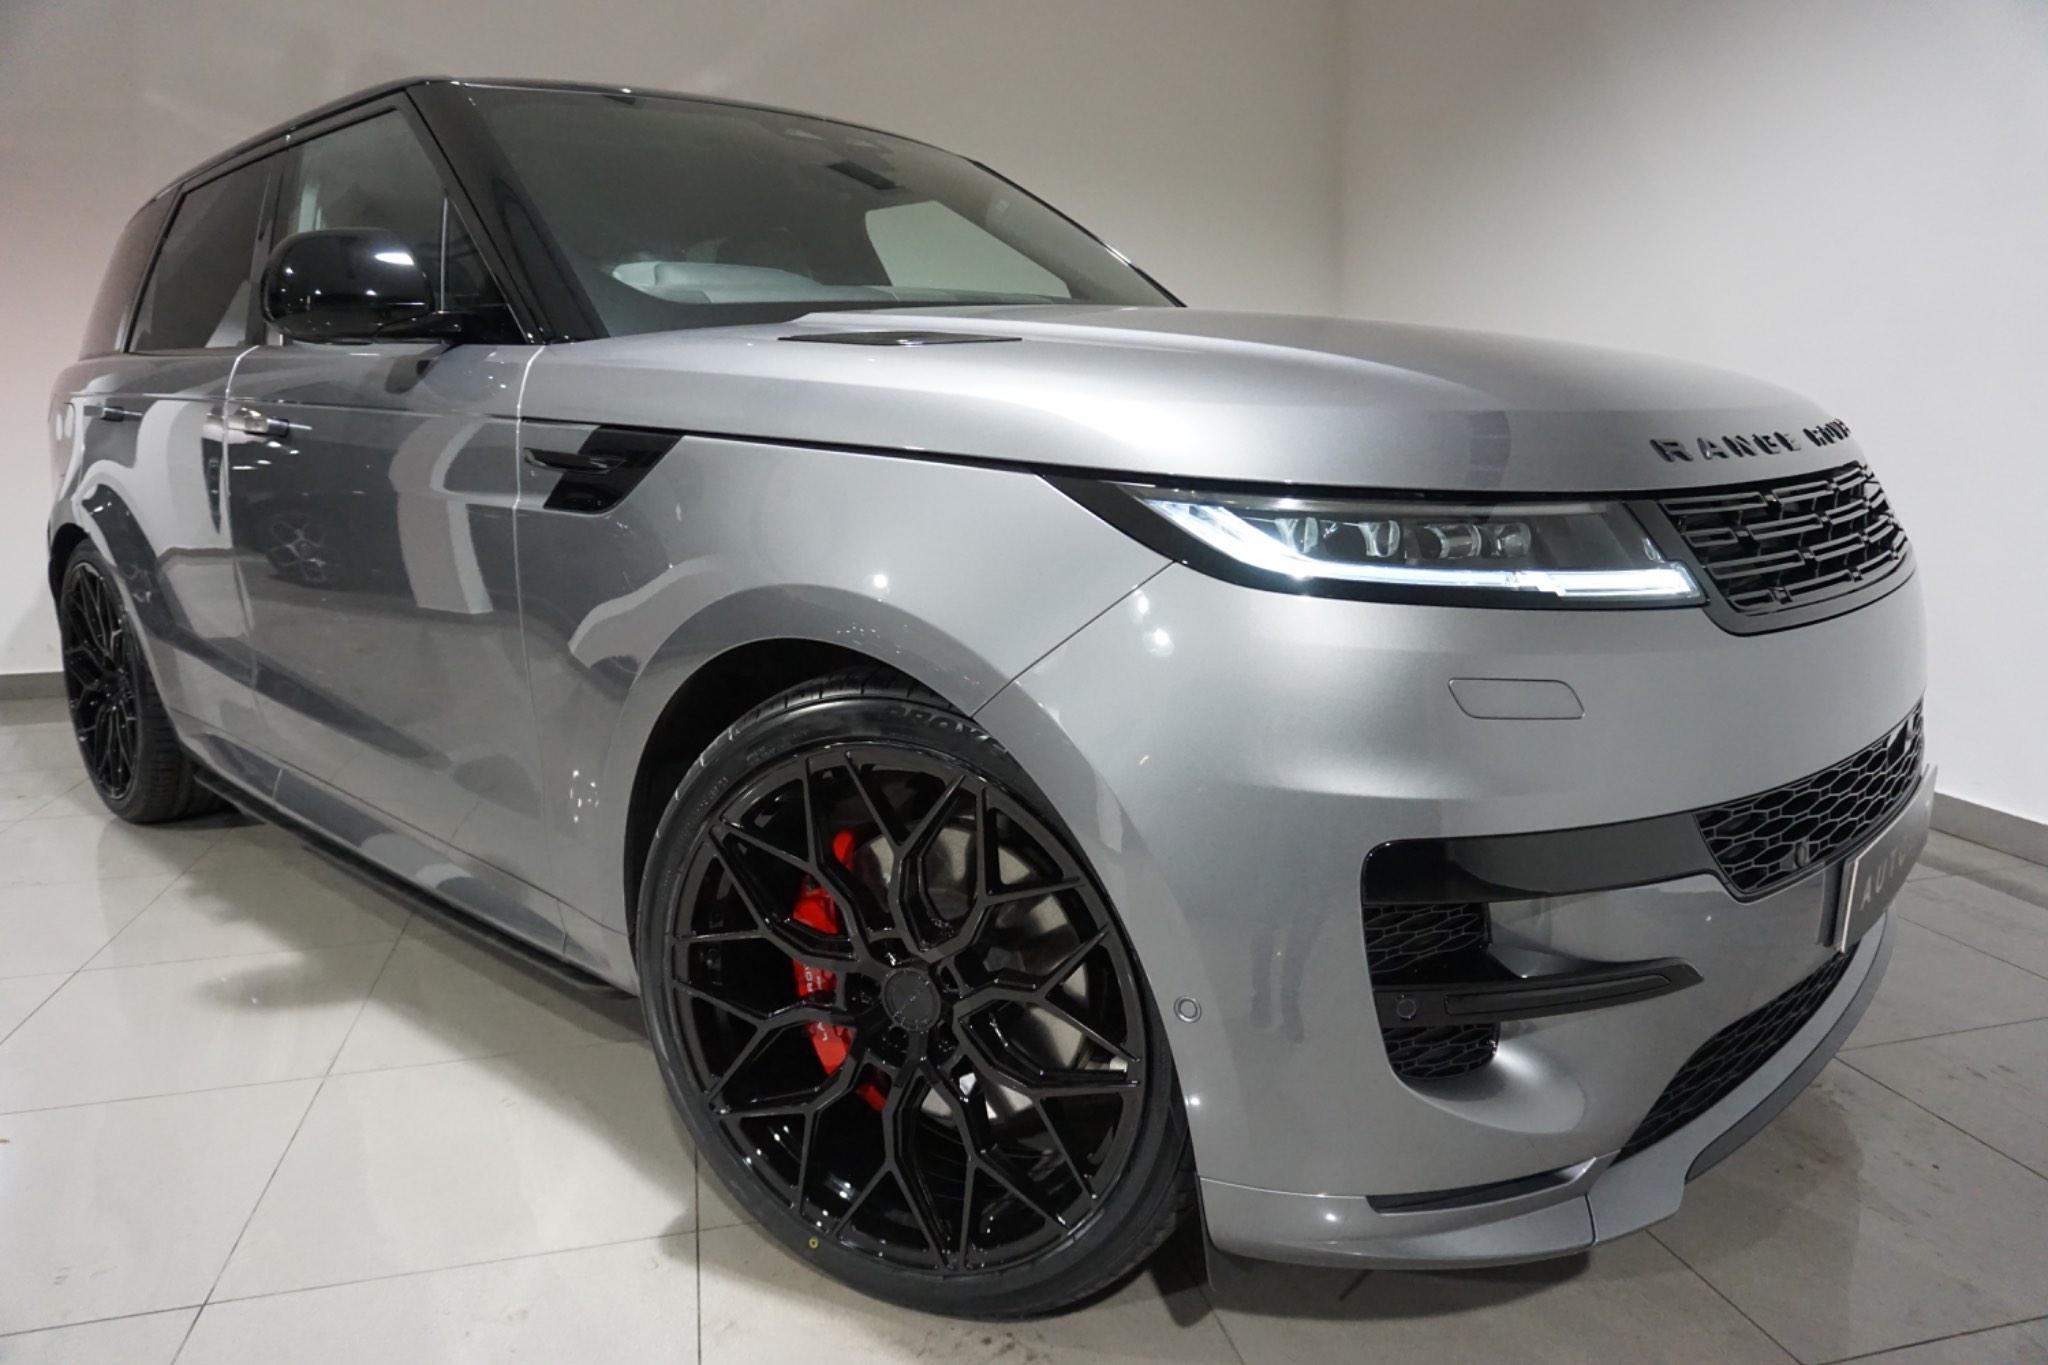 Land Rover Range Rover Sport 3.0 D300 MHEV Dynamic SE Auto 4WD Euro 6 (s/s) 5dr